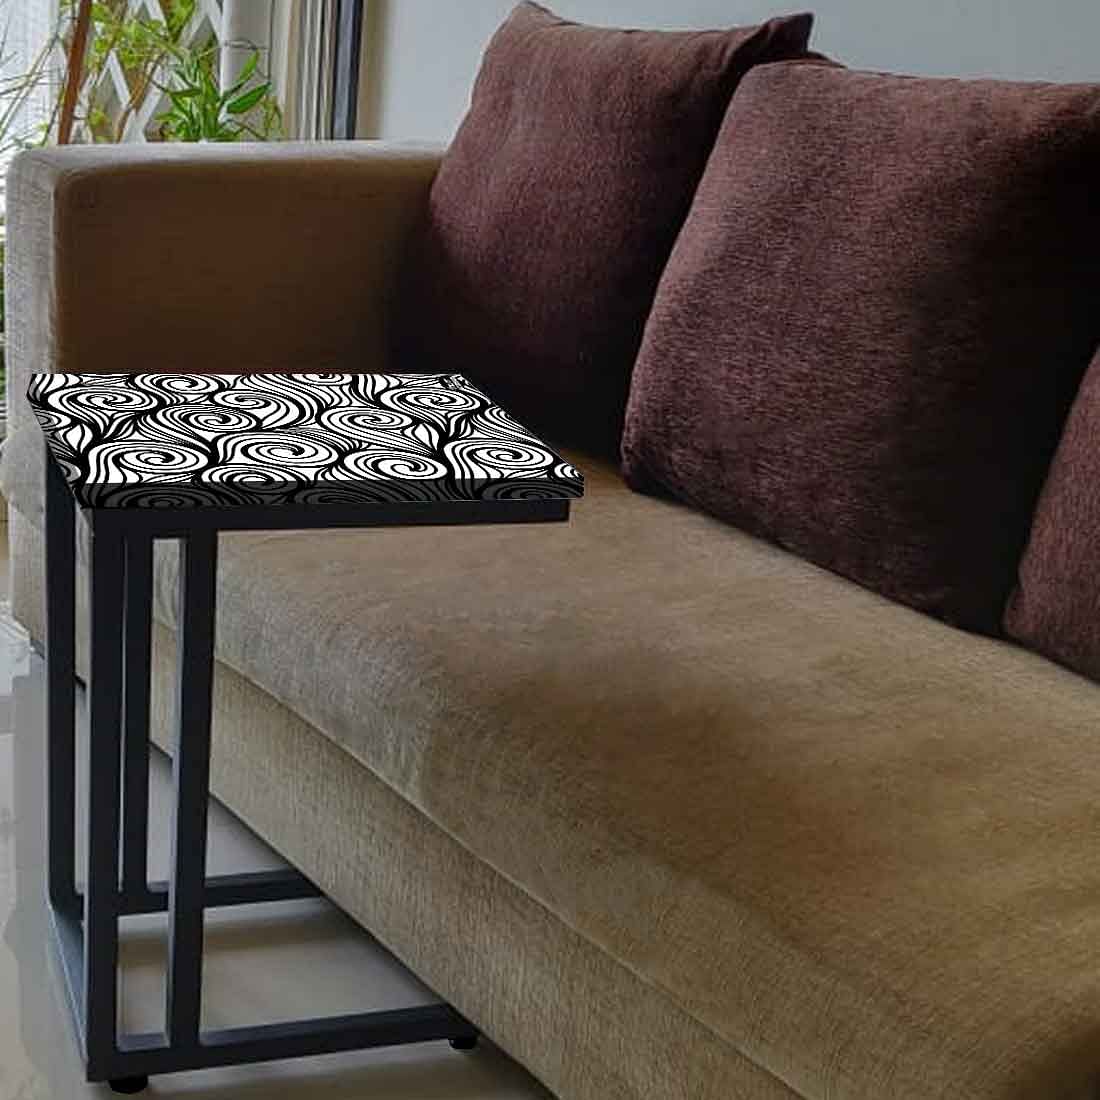 C Shaped Laptop Table For Sofa -Waves Pattern Nutcase